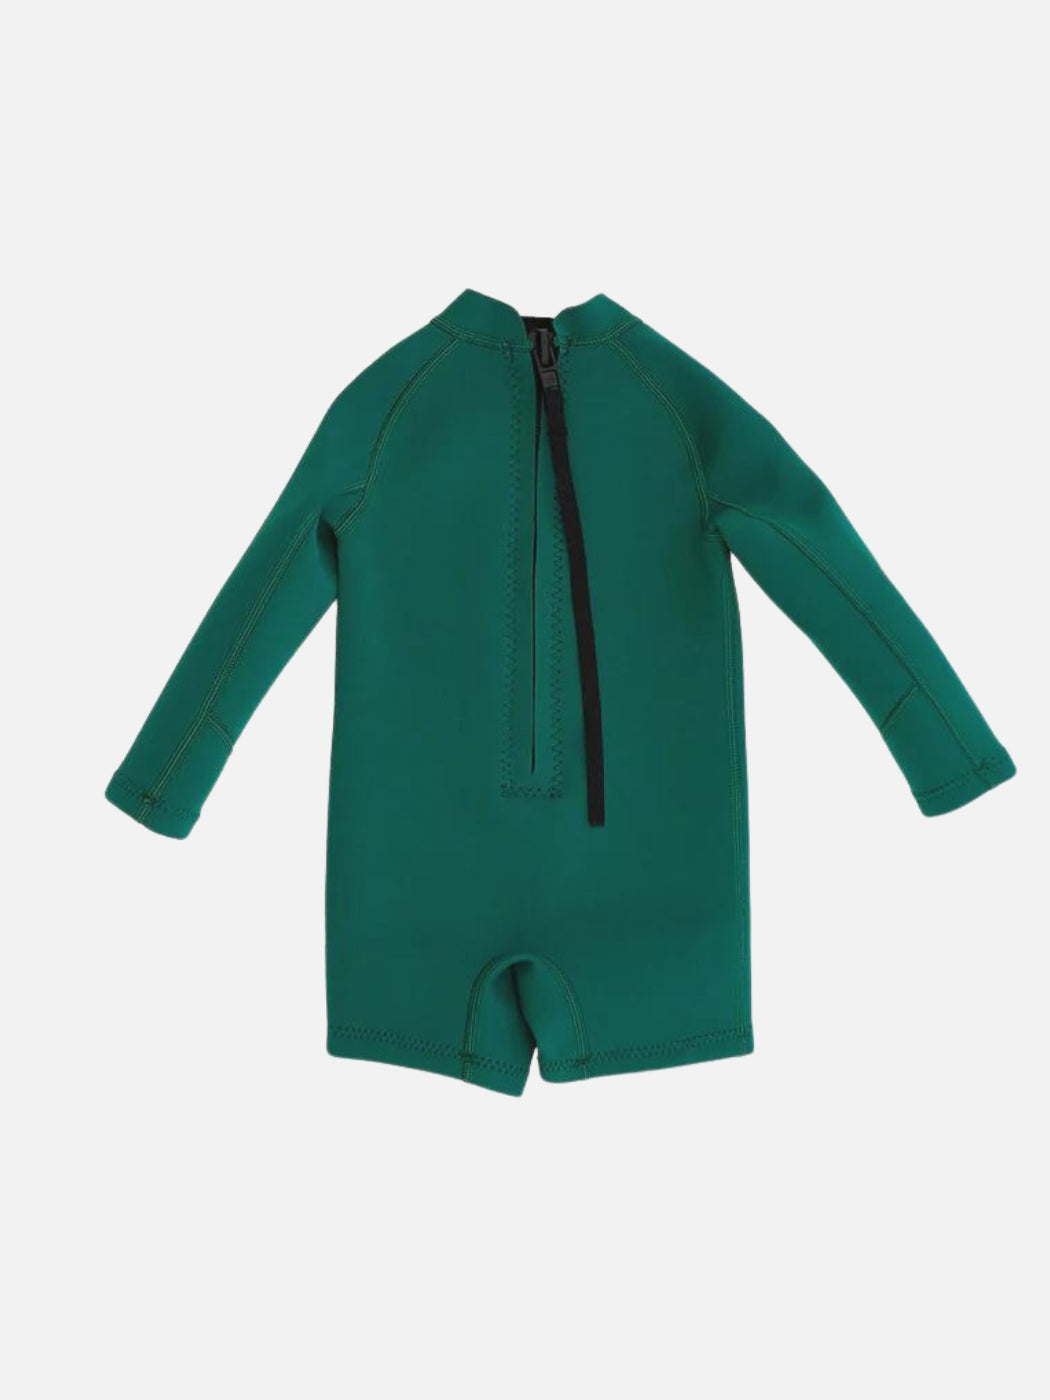 Springsuit Wetsuit - Forest Green